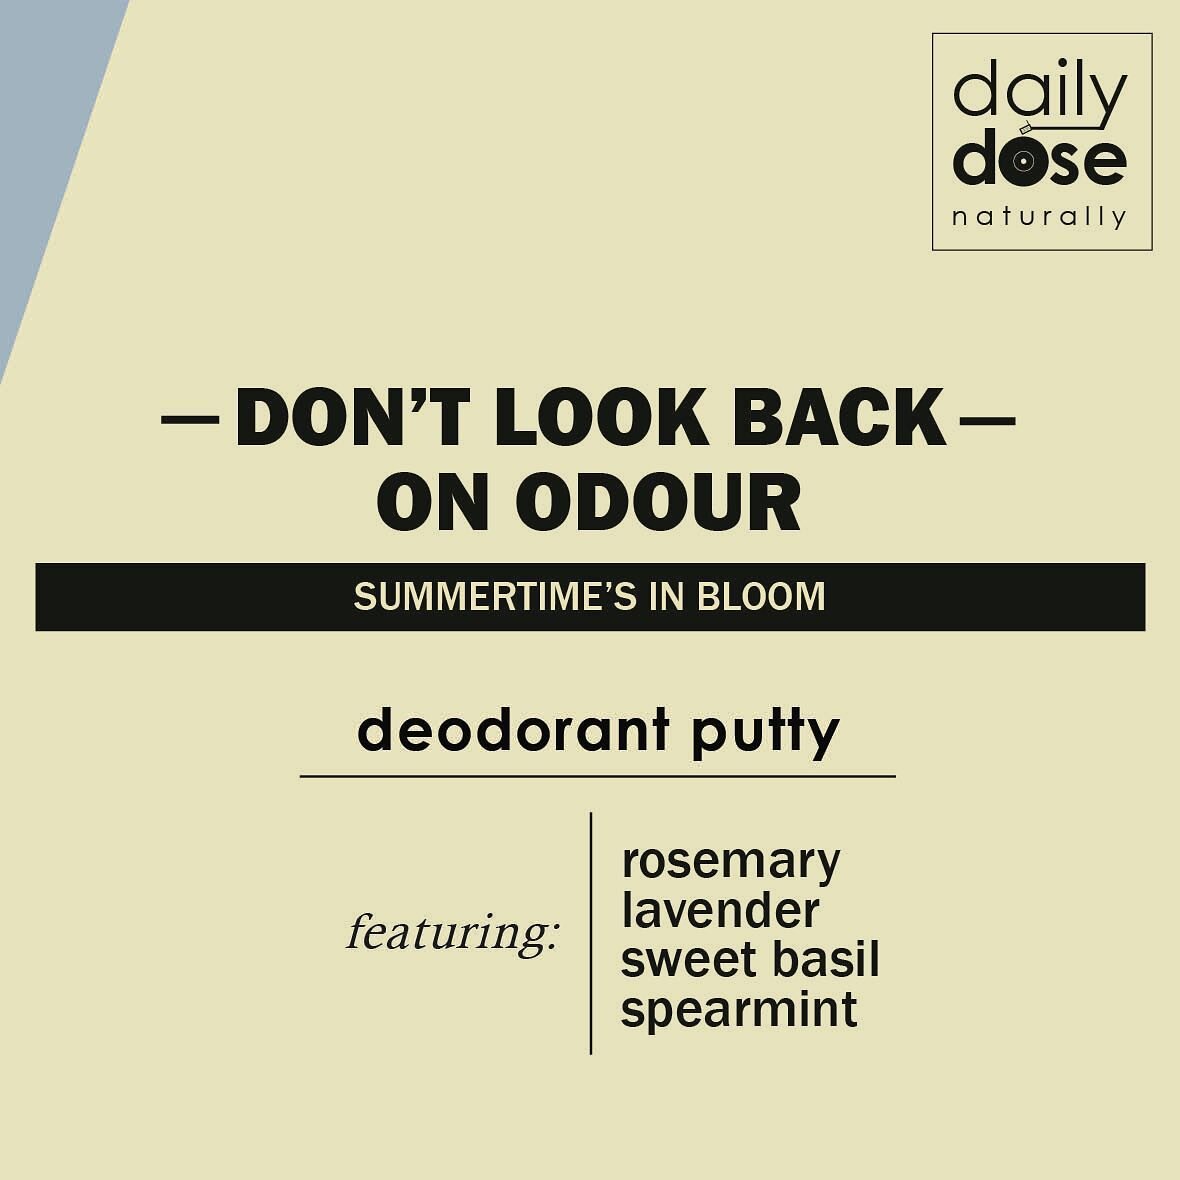 Summertime certainly is in bloom! ☀️Beat the heat (or at least avoid the potential underarm odour) with our all-natural deodorant featuring a premium blend of refreshing, soothing essential oils.

SMELLING LIKE A ROCK STAR ★ 

#dontlookbackonodour #s